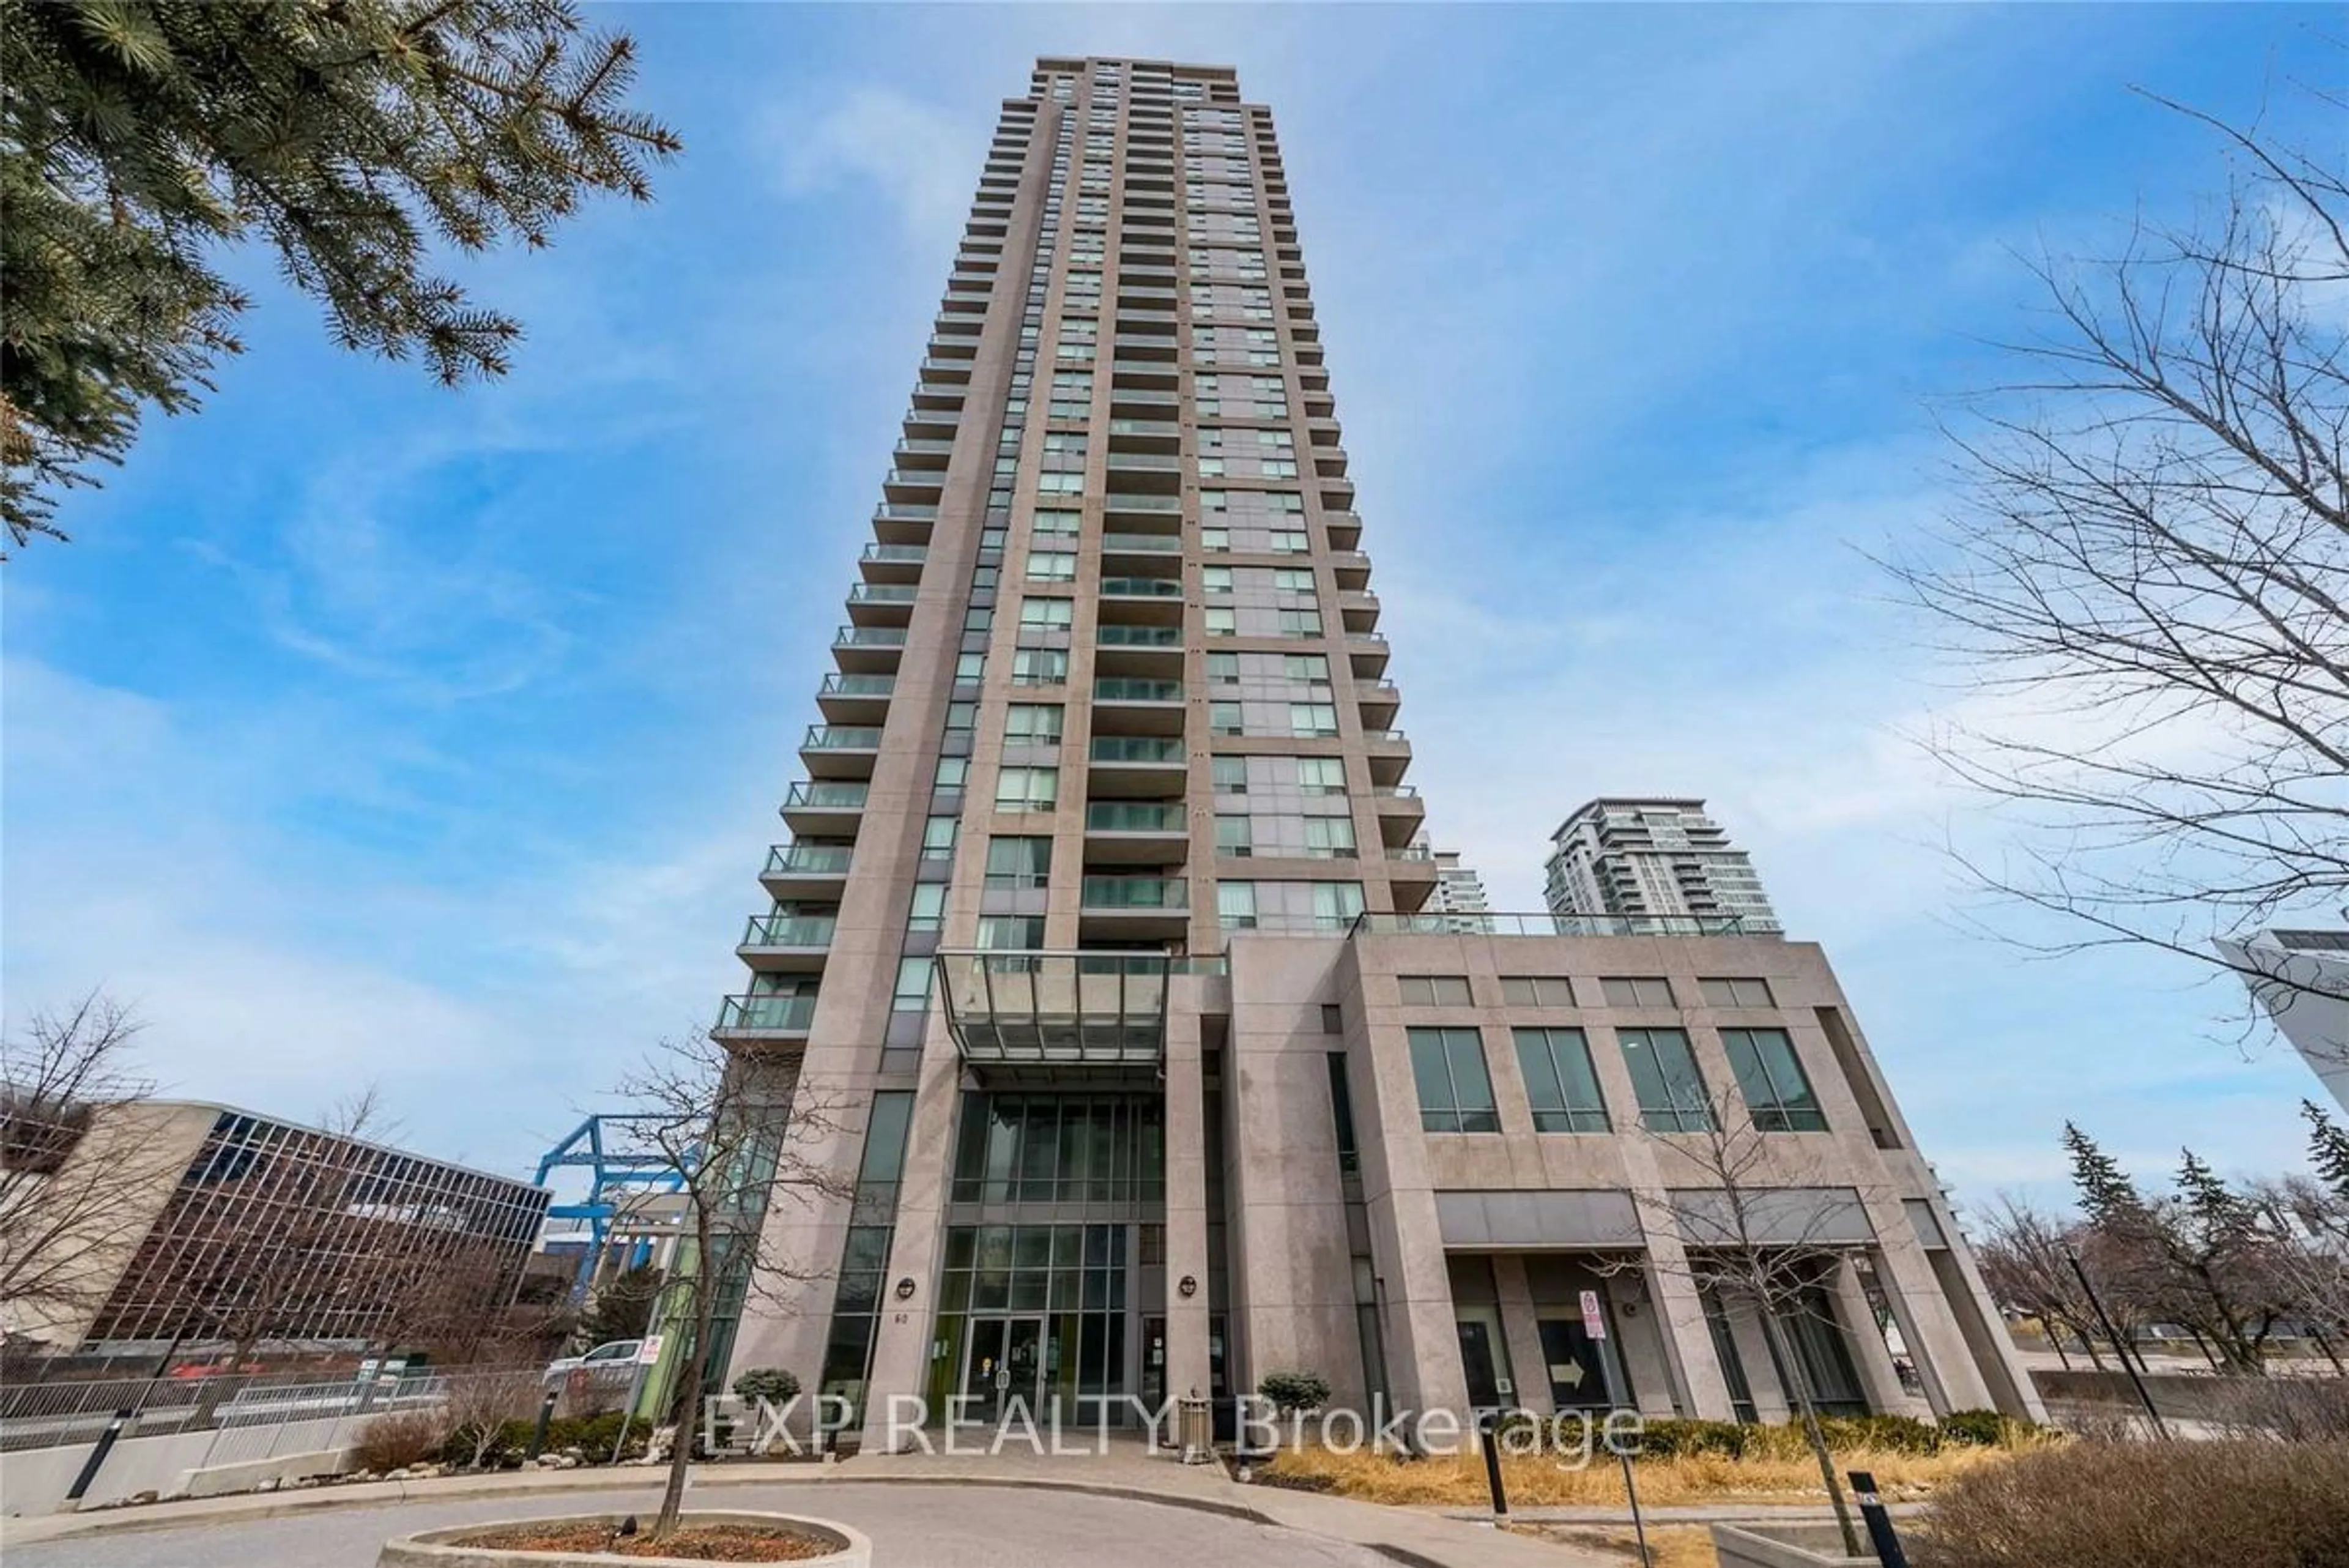 A pic from exterior of the house or condo for 60 Brian Harrison Way #405, Toronto Ontario M1P 5J5